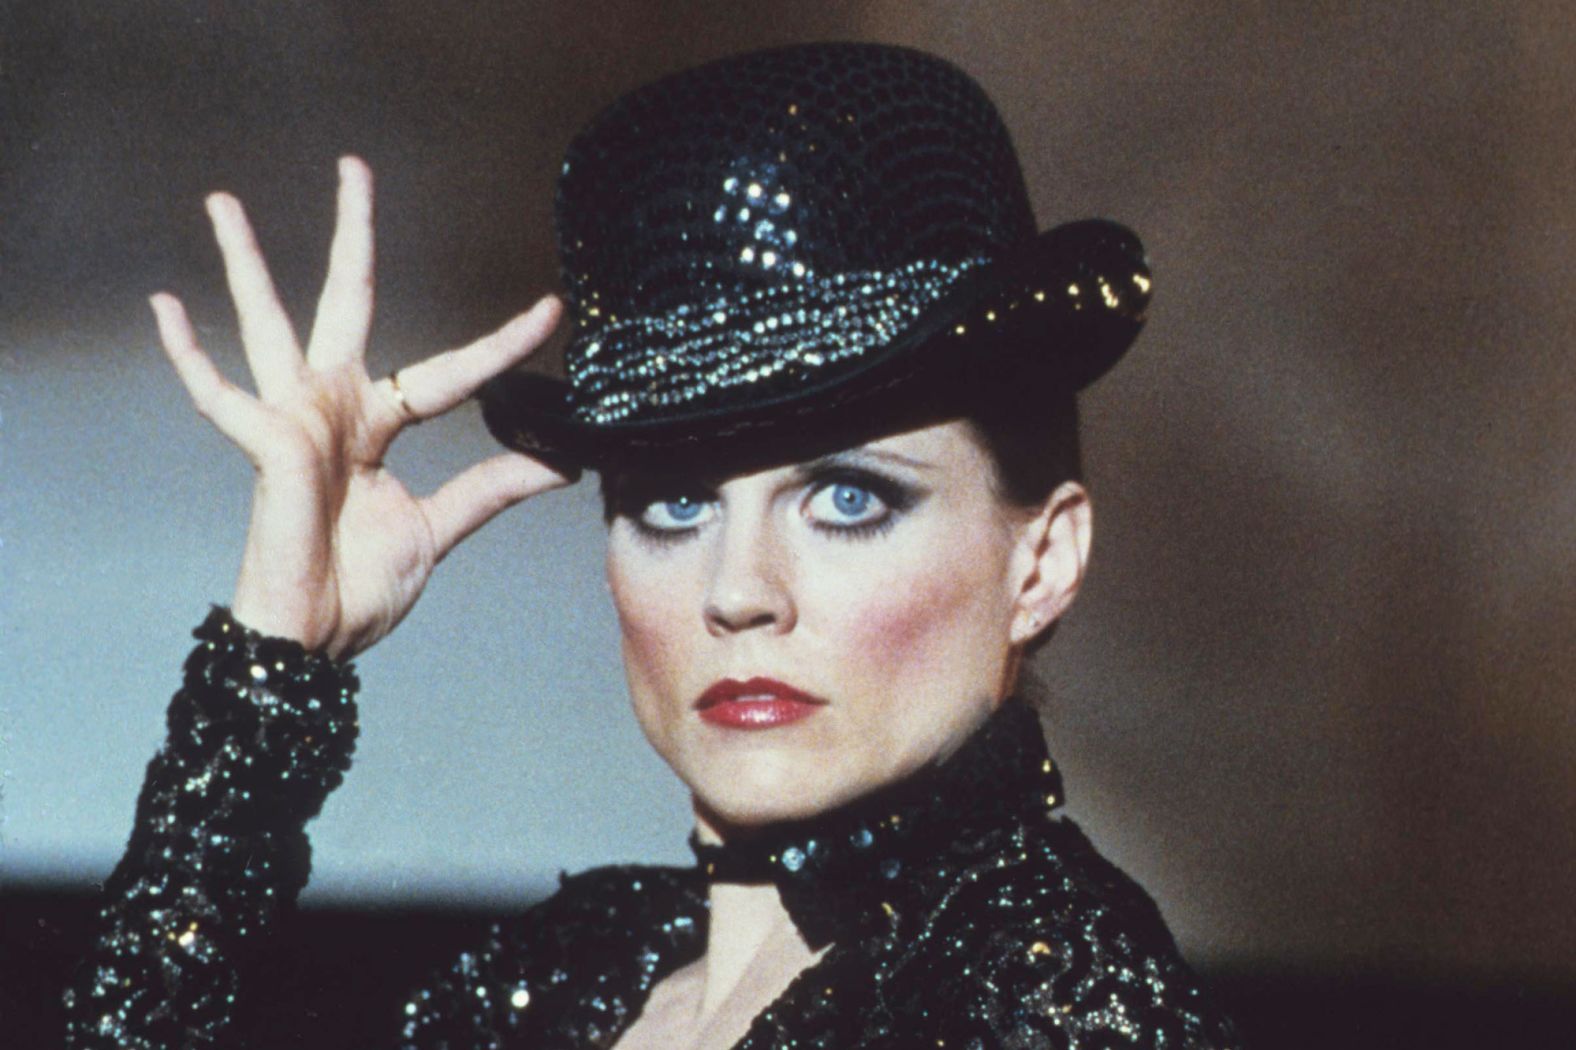 <a href="https://www.cnn.com/2020/12/15/us/ann-reinking-broadway-star-death/index.html" target="_blank">Ann Reinking</a>, the actress, dancer and choreographer who played Roxie Hart in the Broadway musical "Chicago," died on December 12, her manager confirmed to CNN. She was 71.